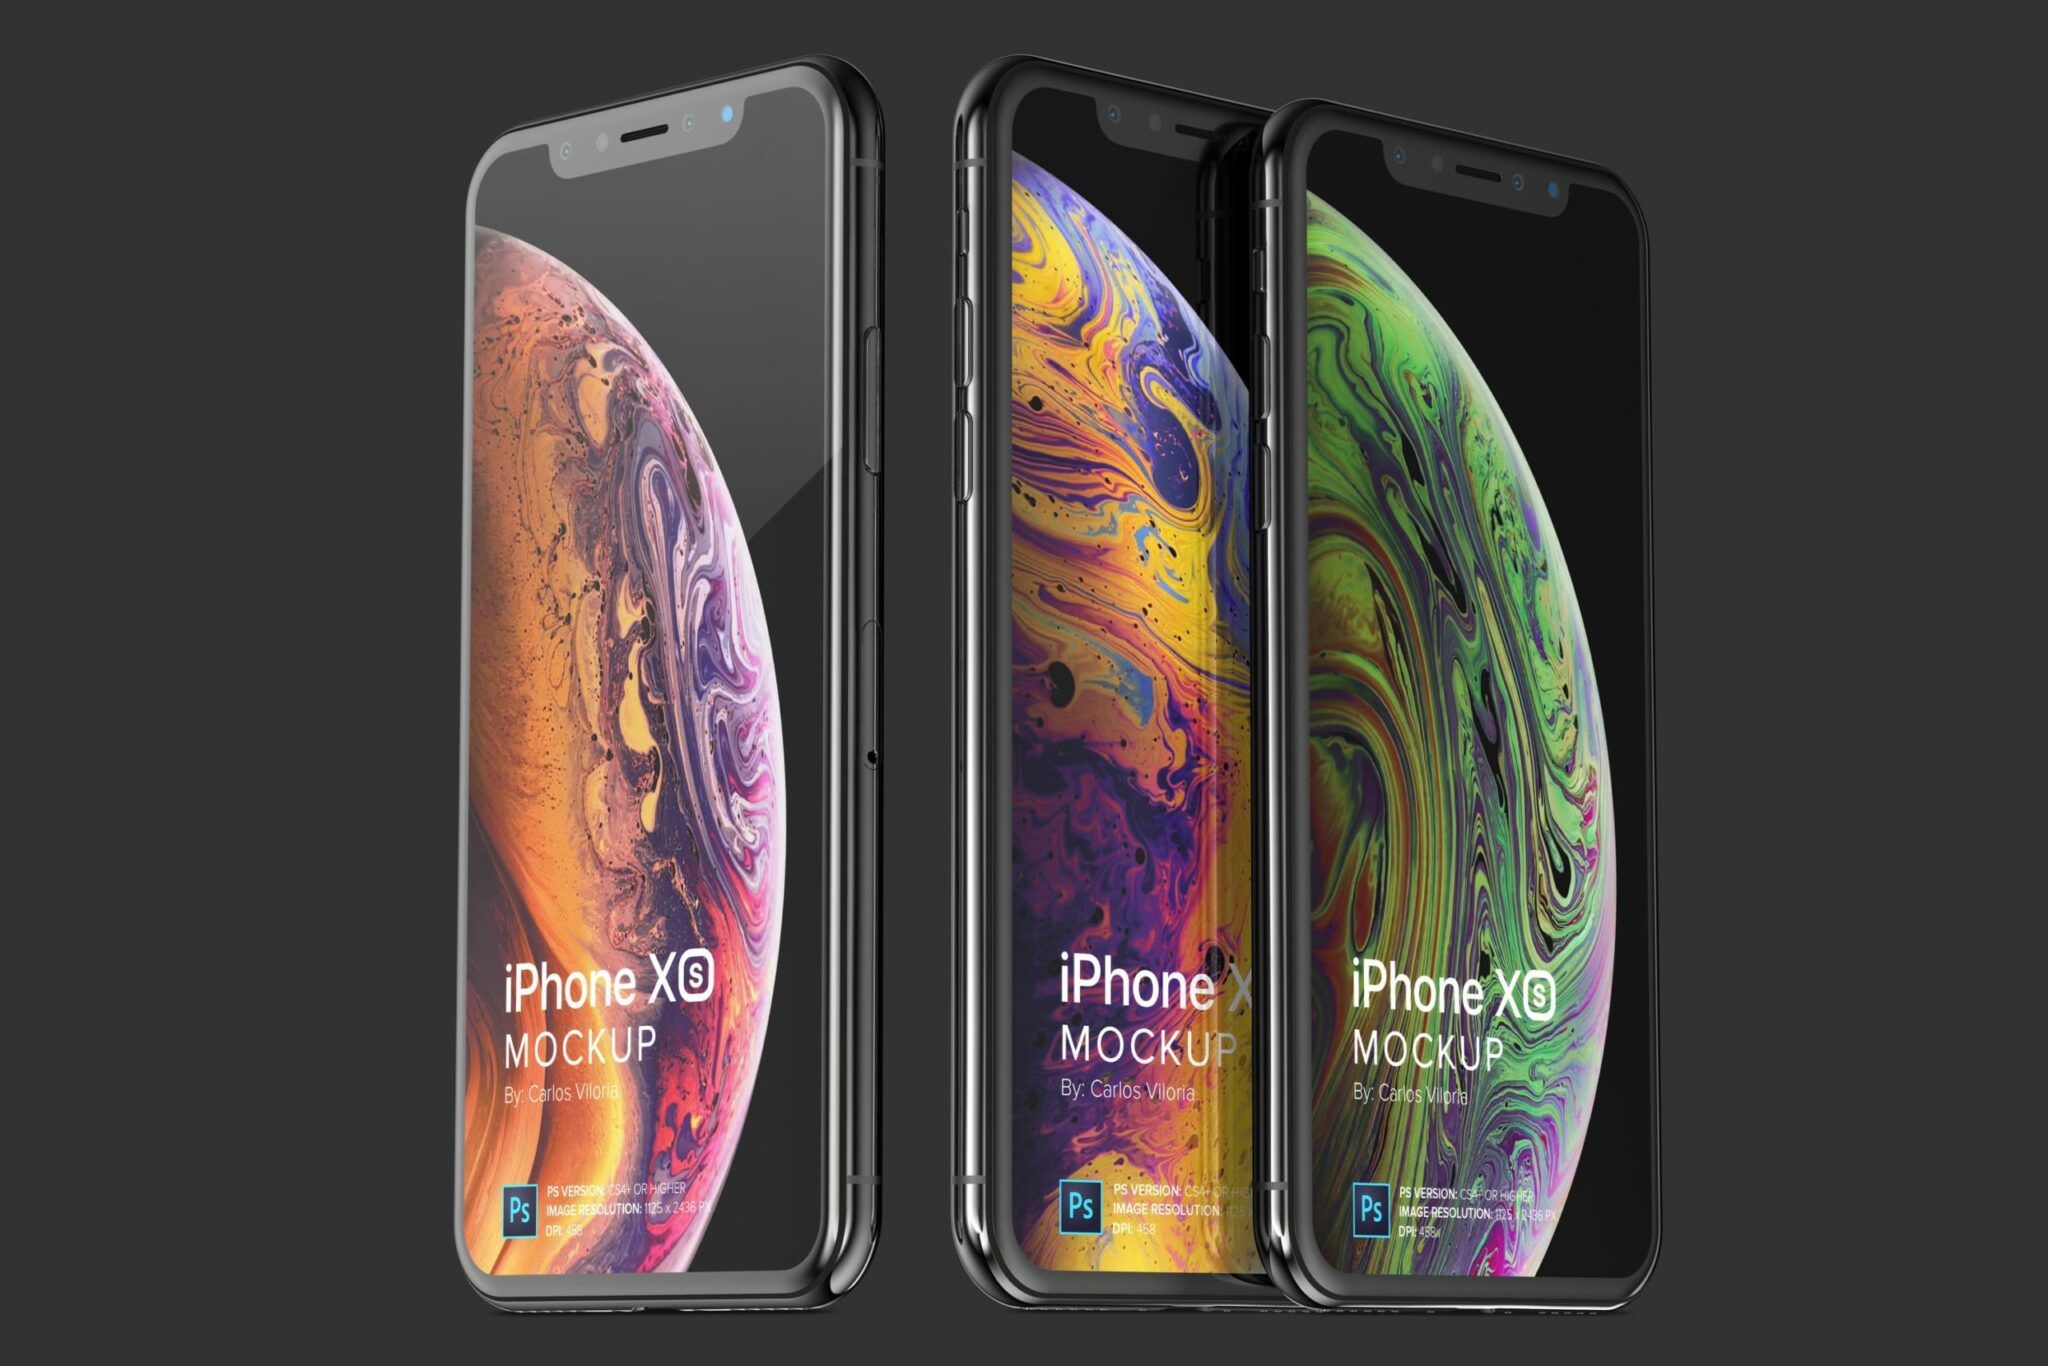 iPhone XS Mockup for iOS Apps Design